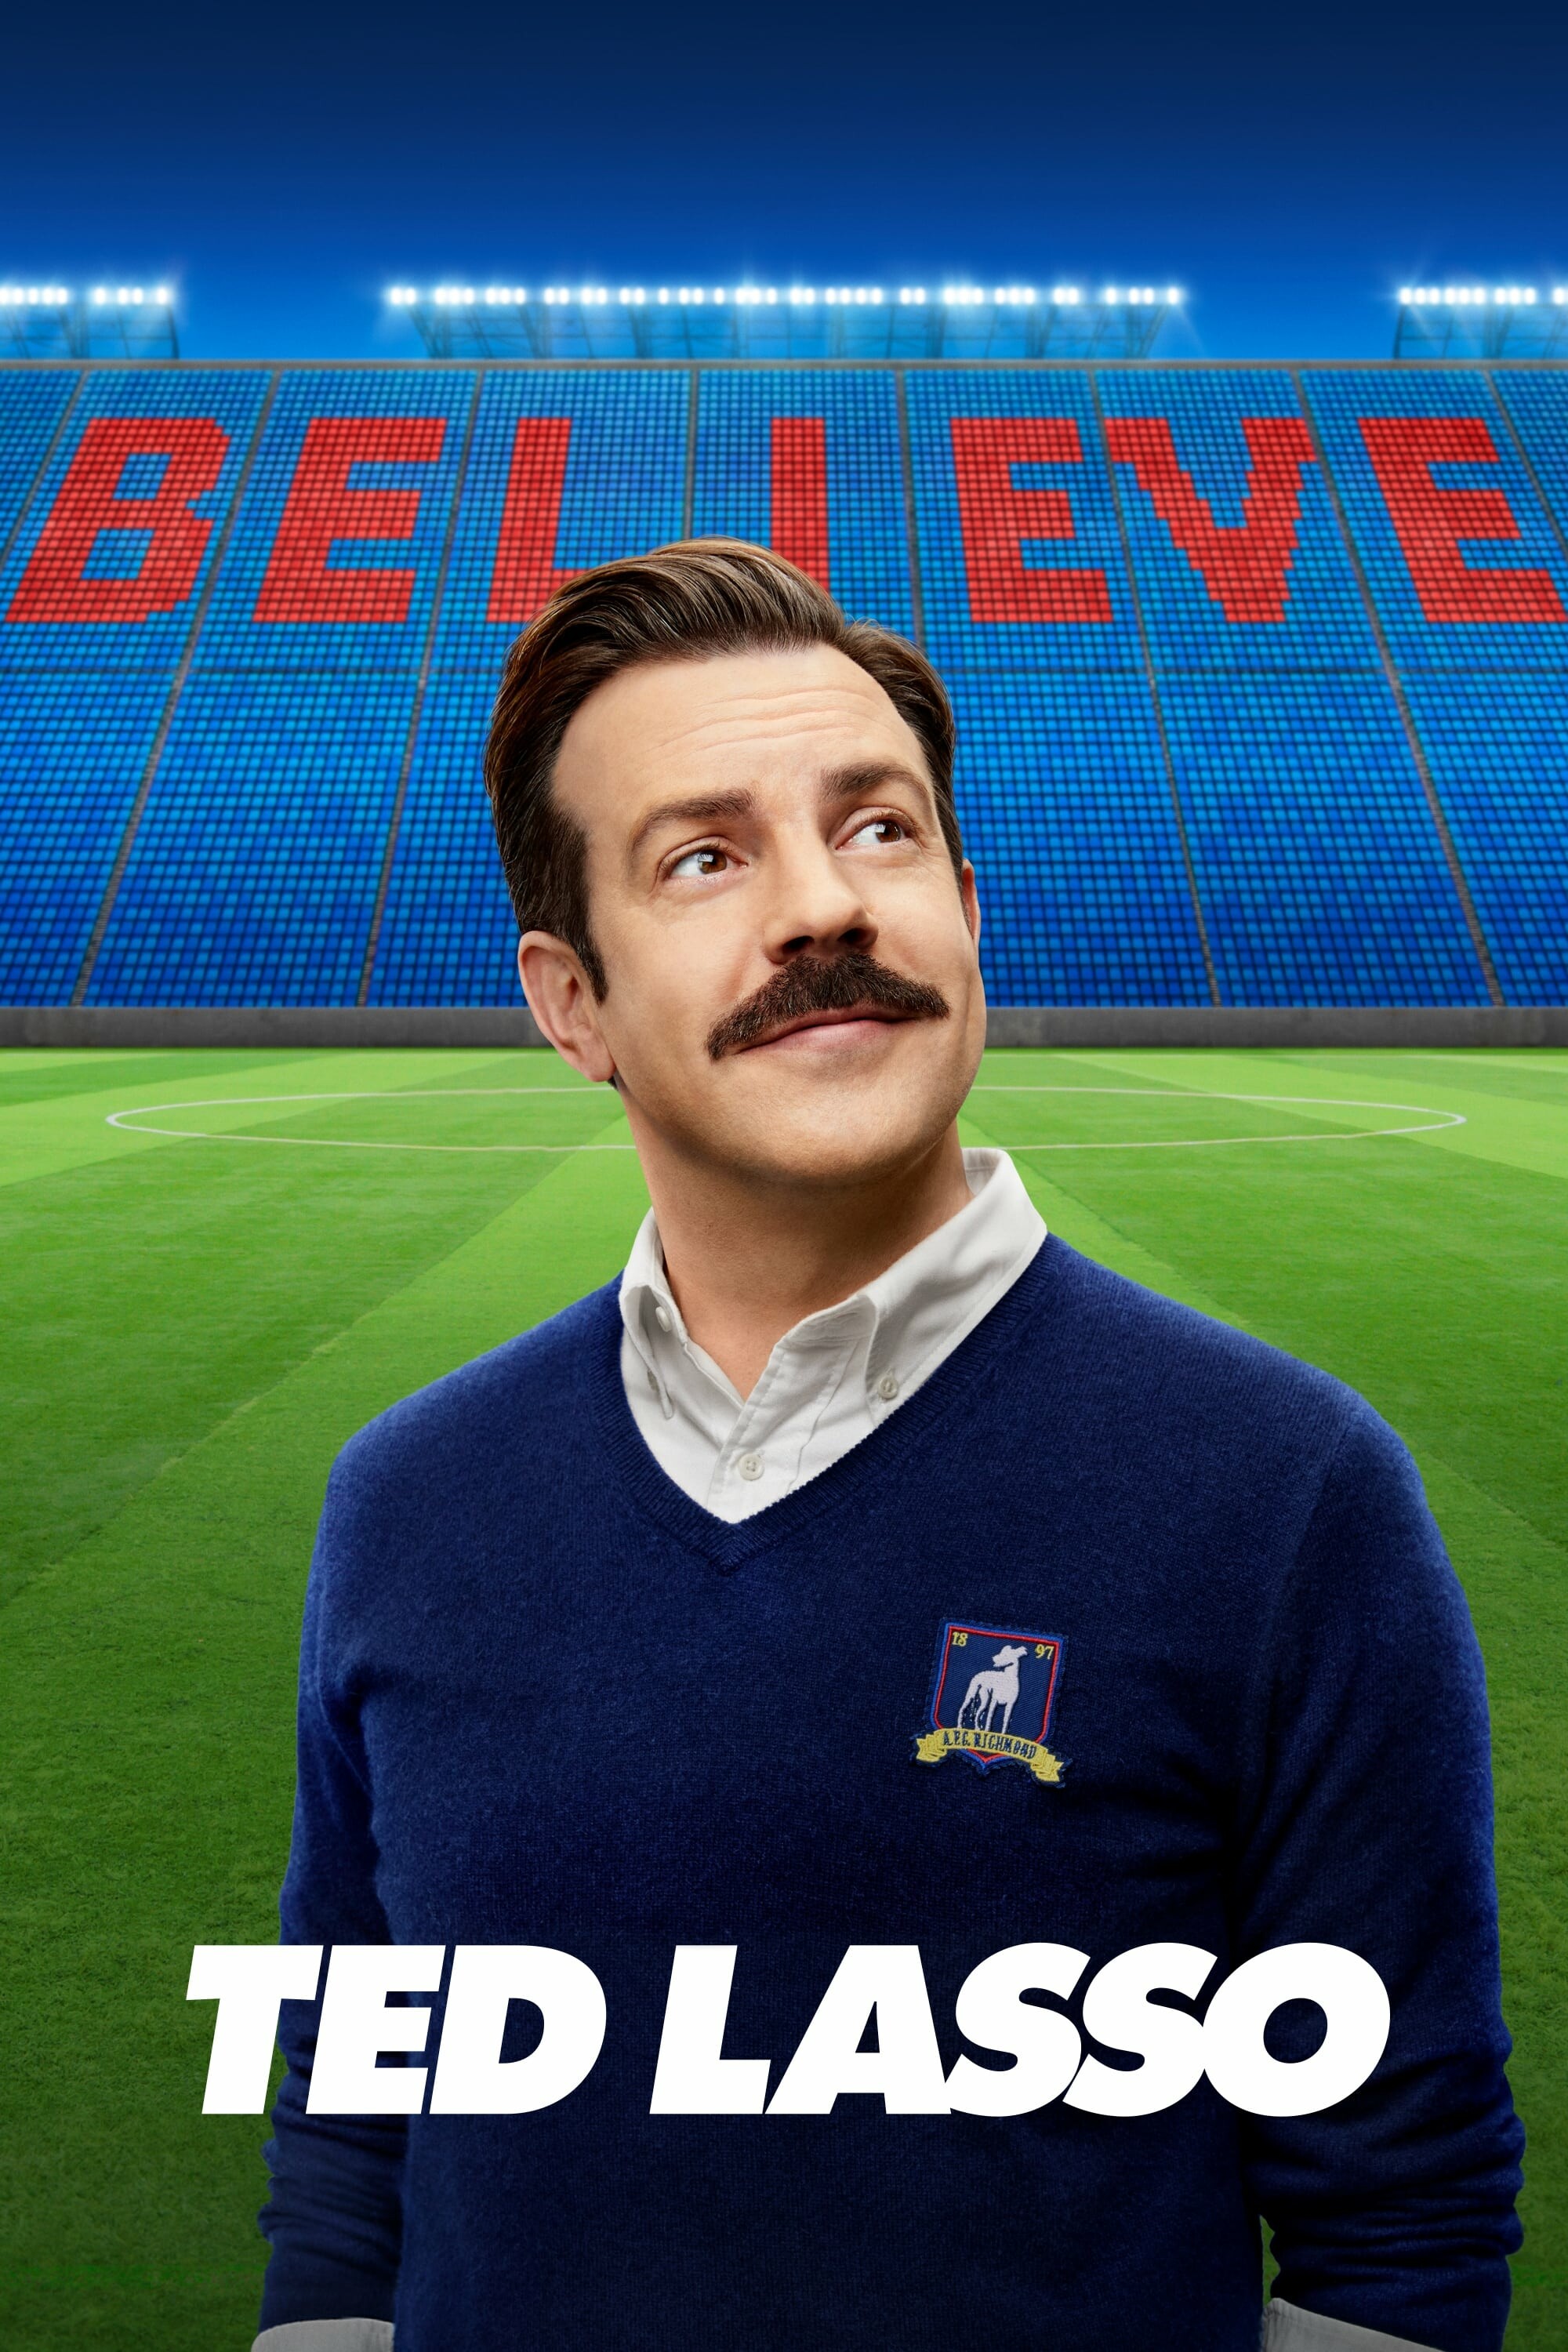 Ted Lasso: Believe, A second season of 12 episodes premiered on July 23, 2021. 2000x3000 HD Background.